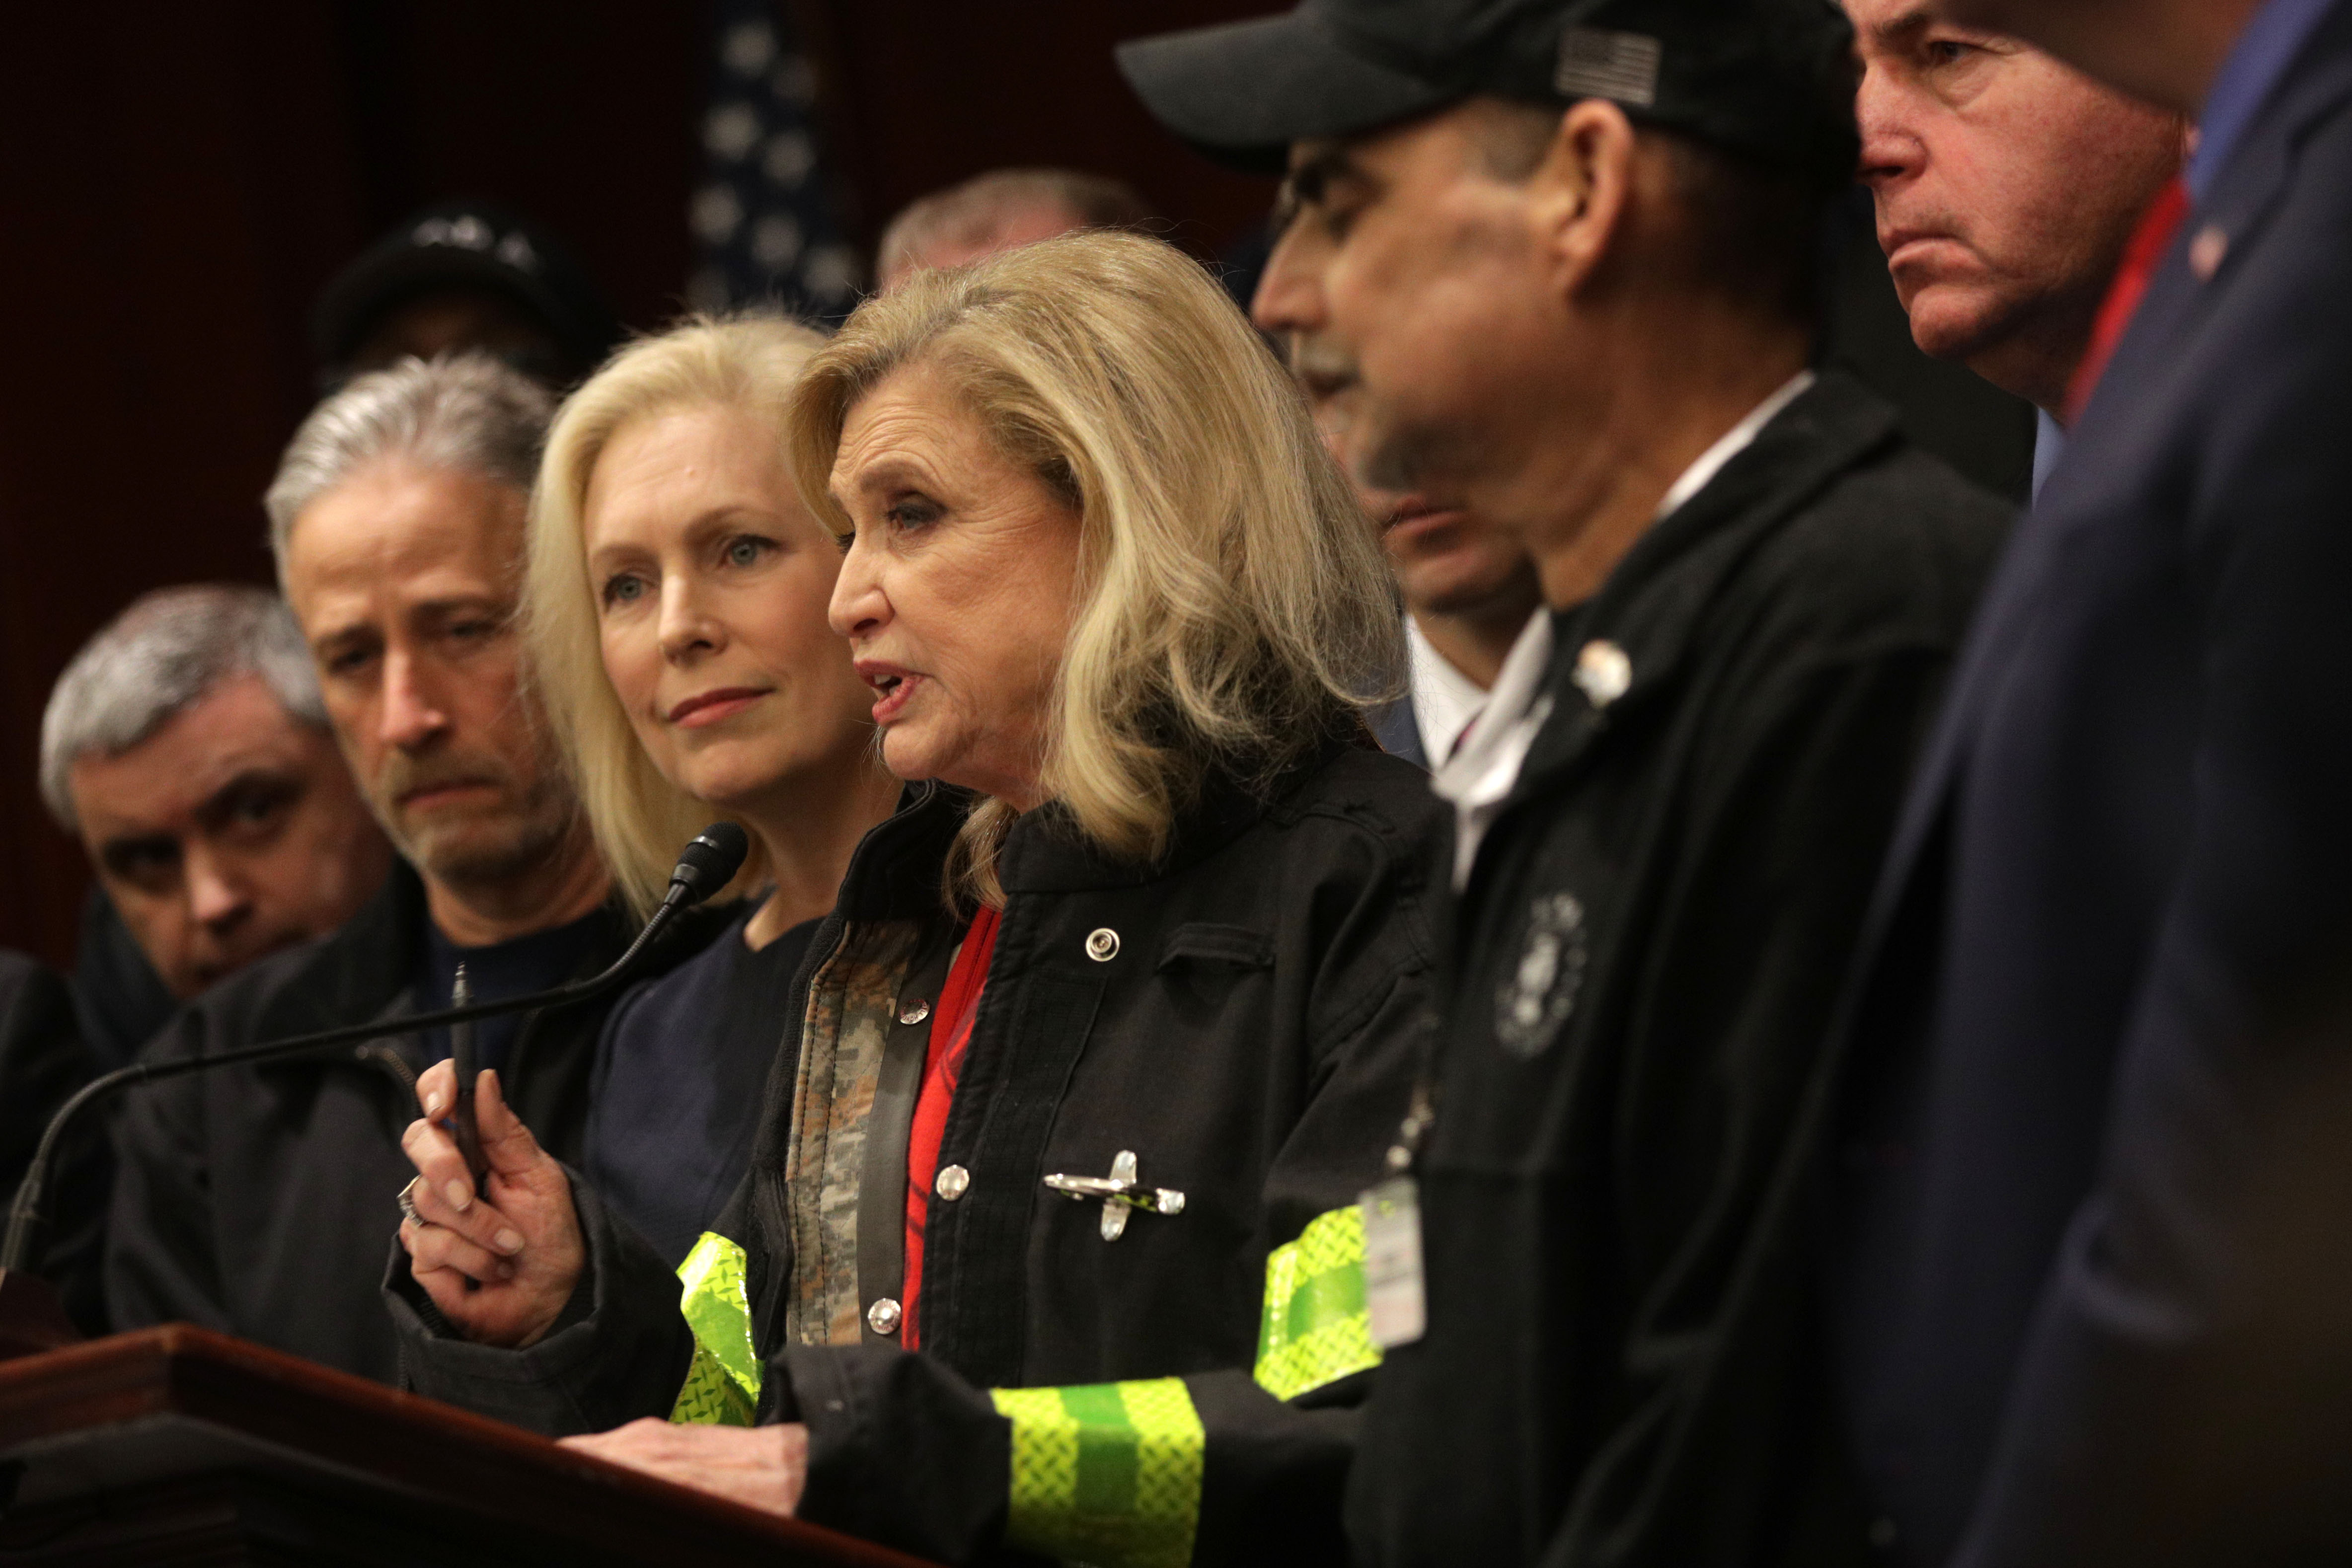 U.S. Rep. Carolyn Maloney (4th L) speaks as Sen. Kirsten Gillibrand (3rd L) and former "The Daily Show" host Jon Stewart (2nd L) listen during a news conference February 25, 2019 on Capitol Hill in Washington, DC. (Photo by Alex Wong/Getty Images)